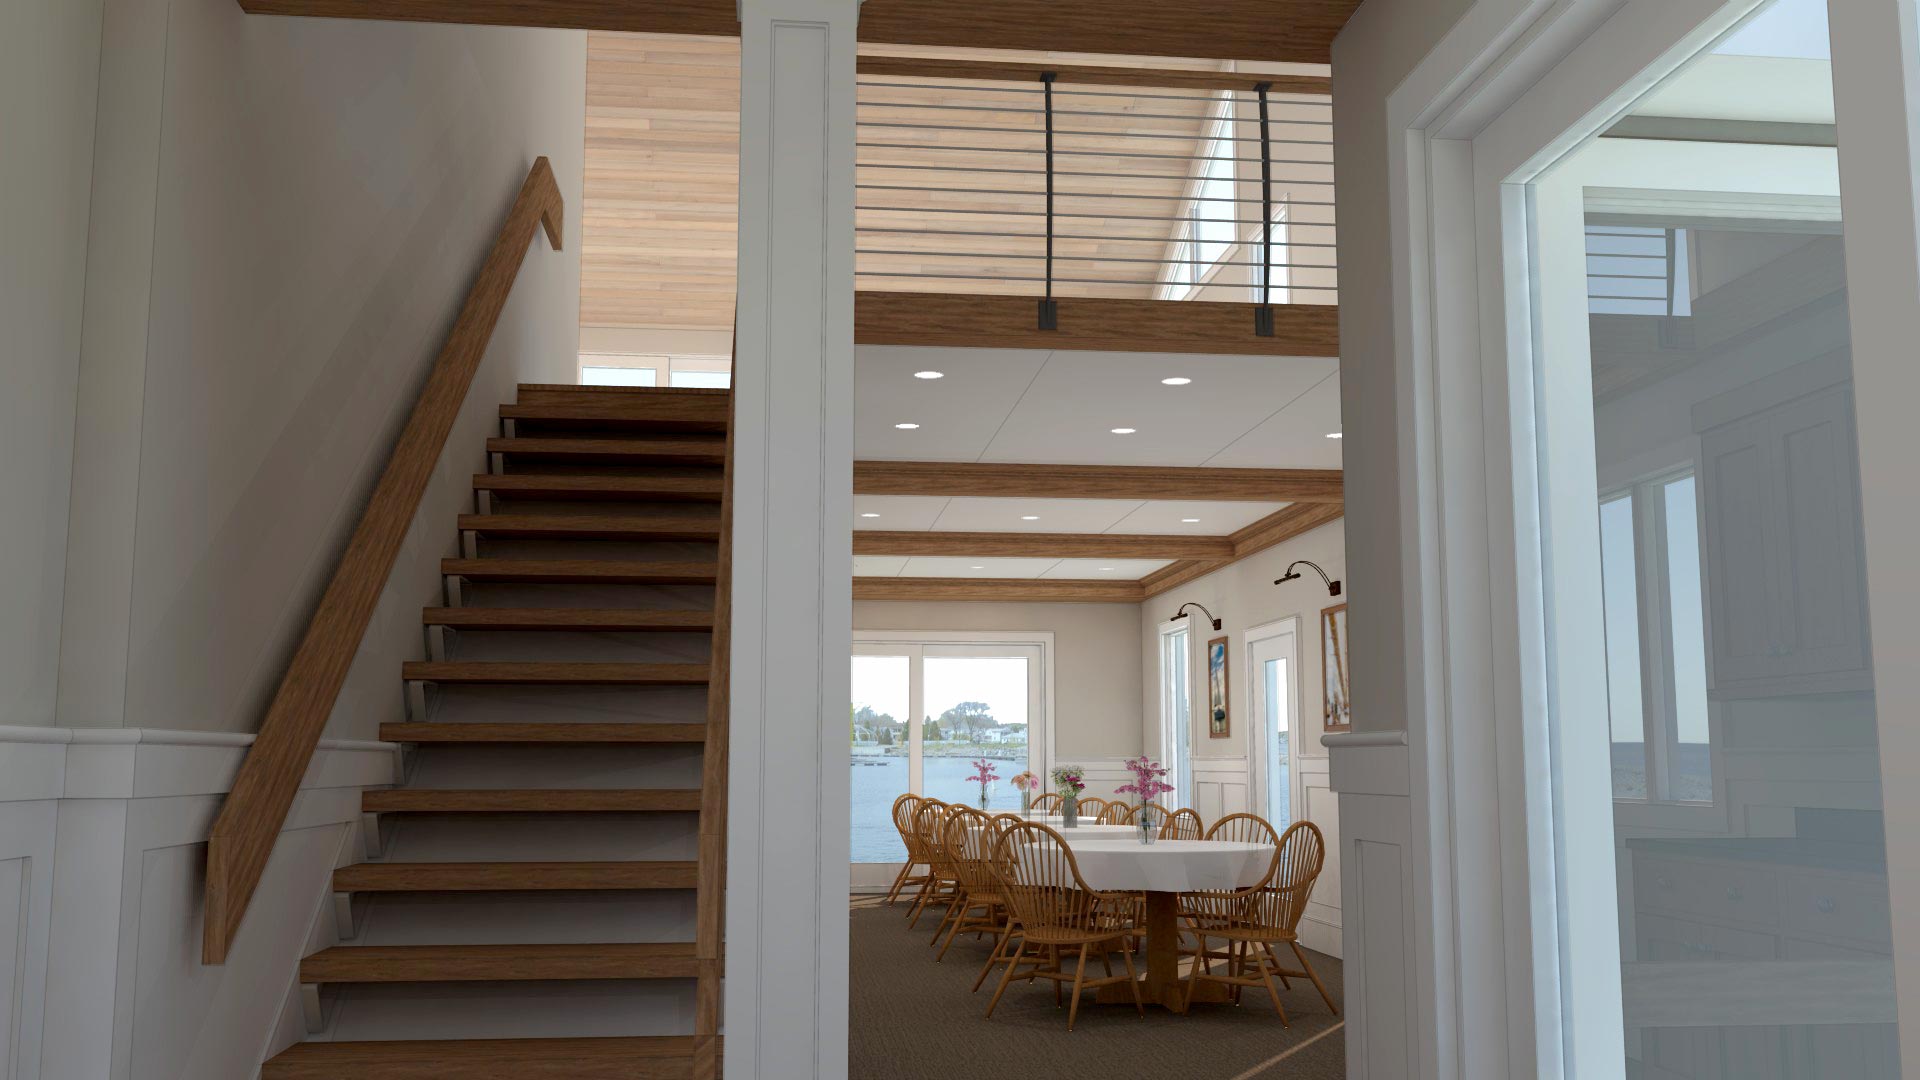 3D rendering of staircase and dining room beyond